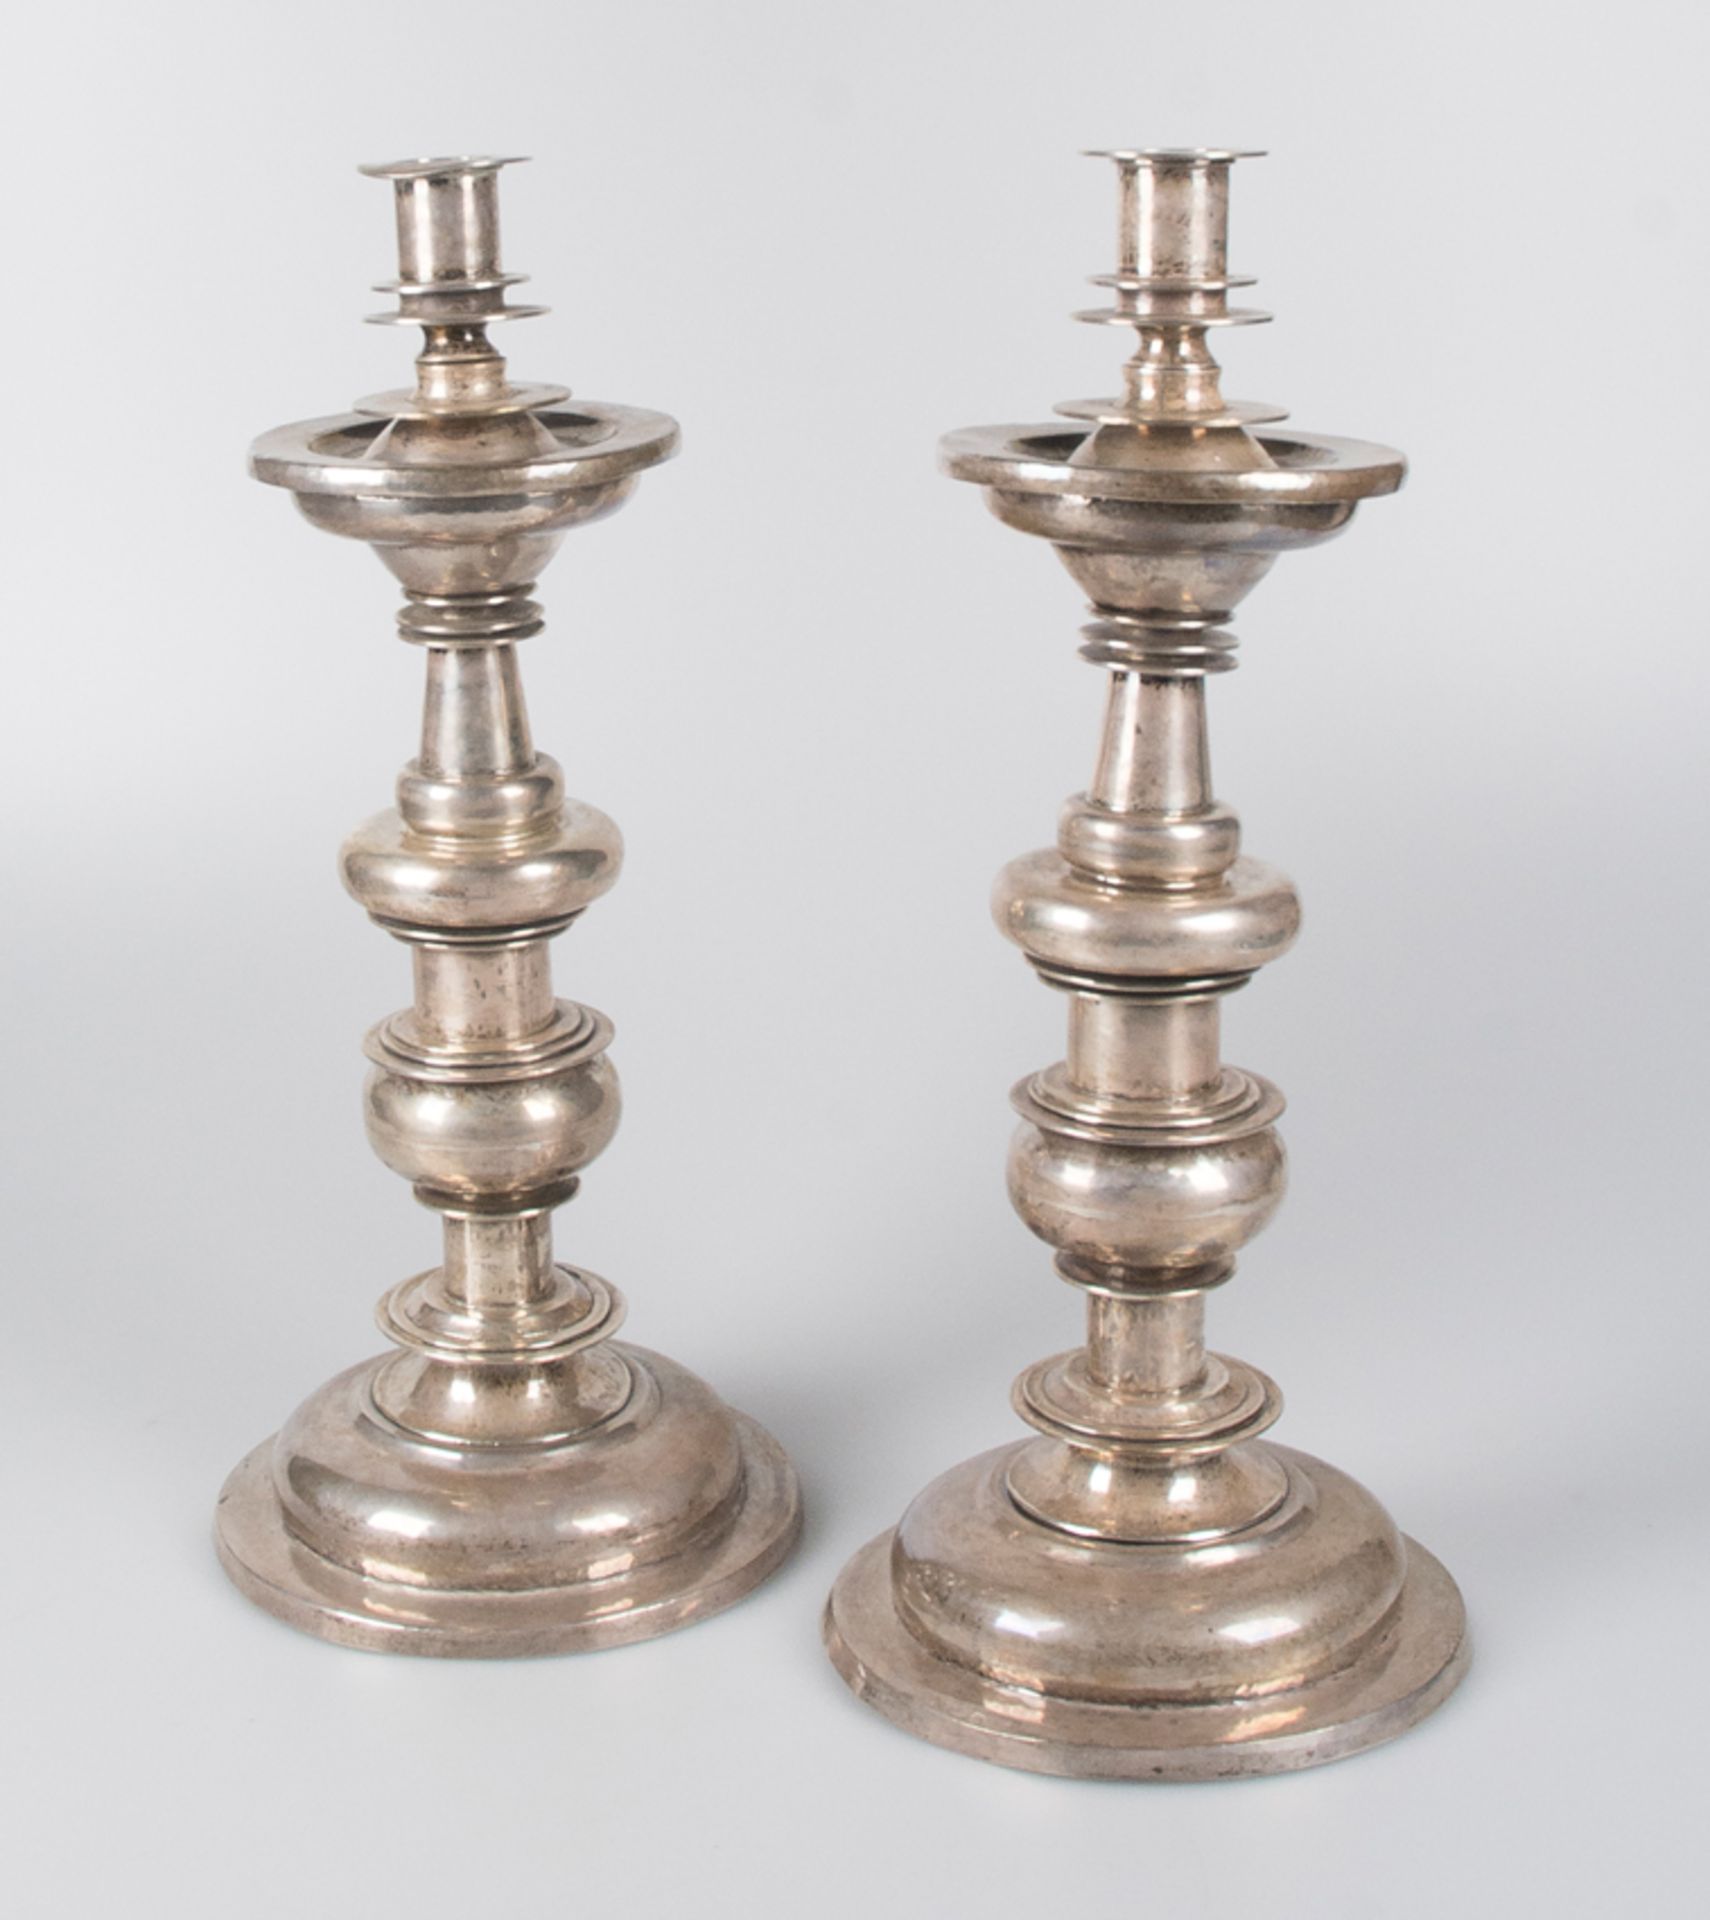 Pair of large silver candlesticks. 17th - 18th century.